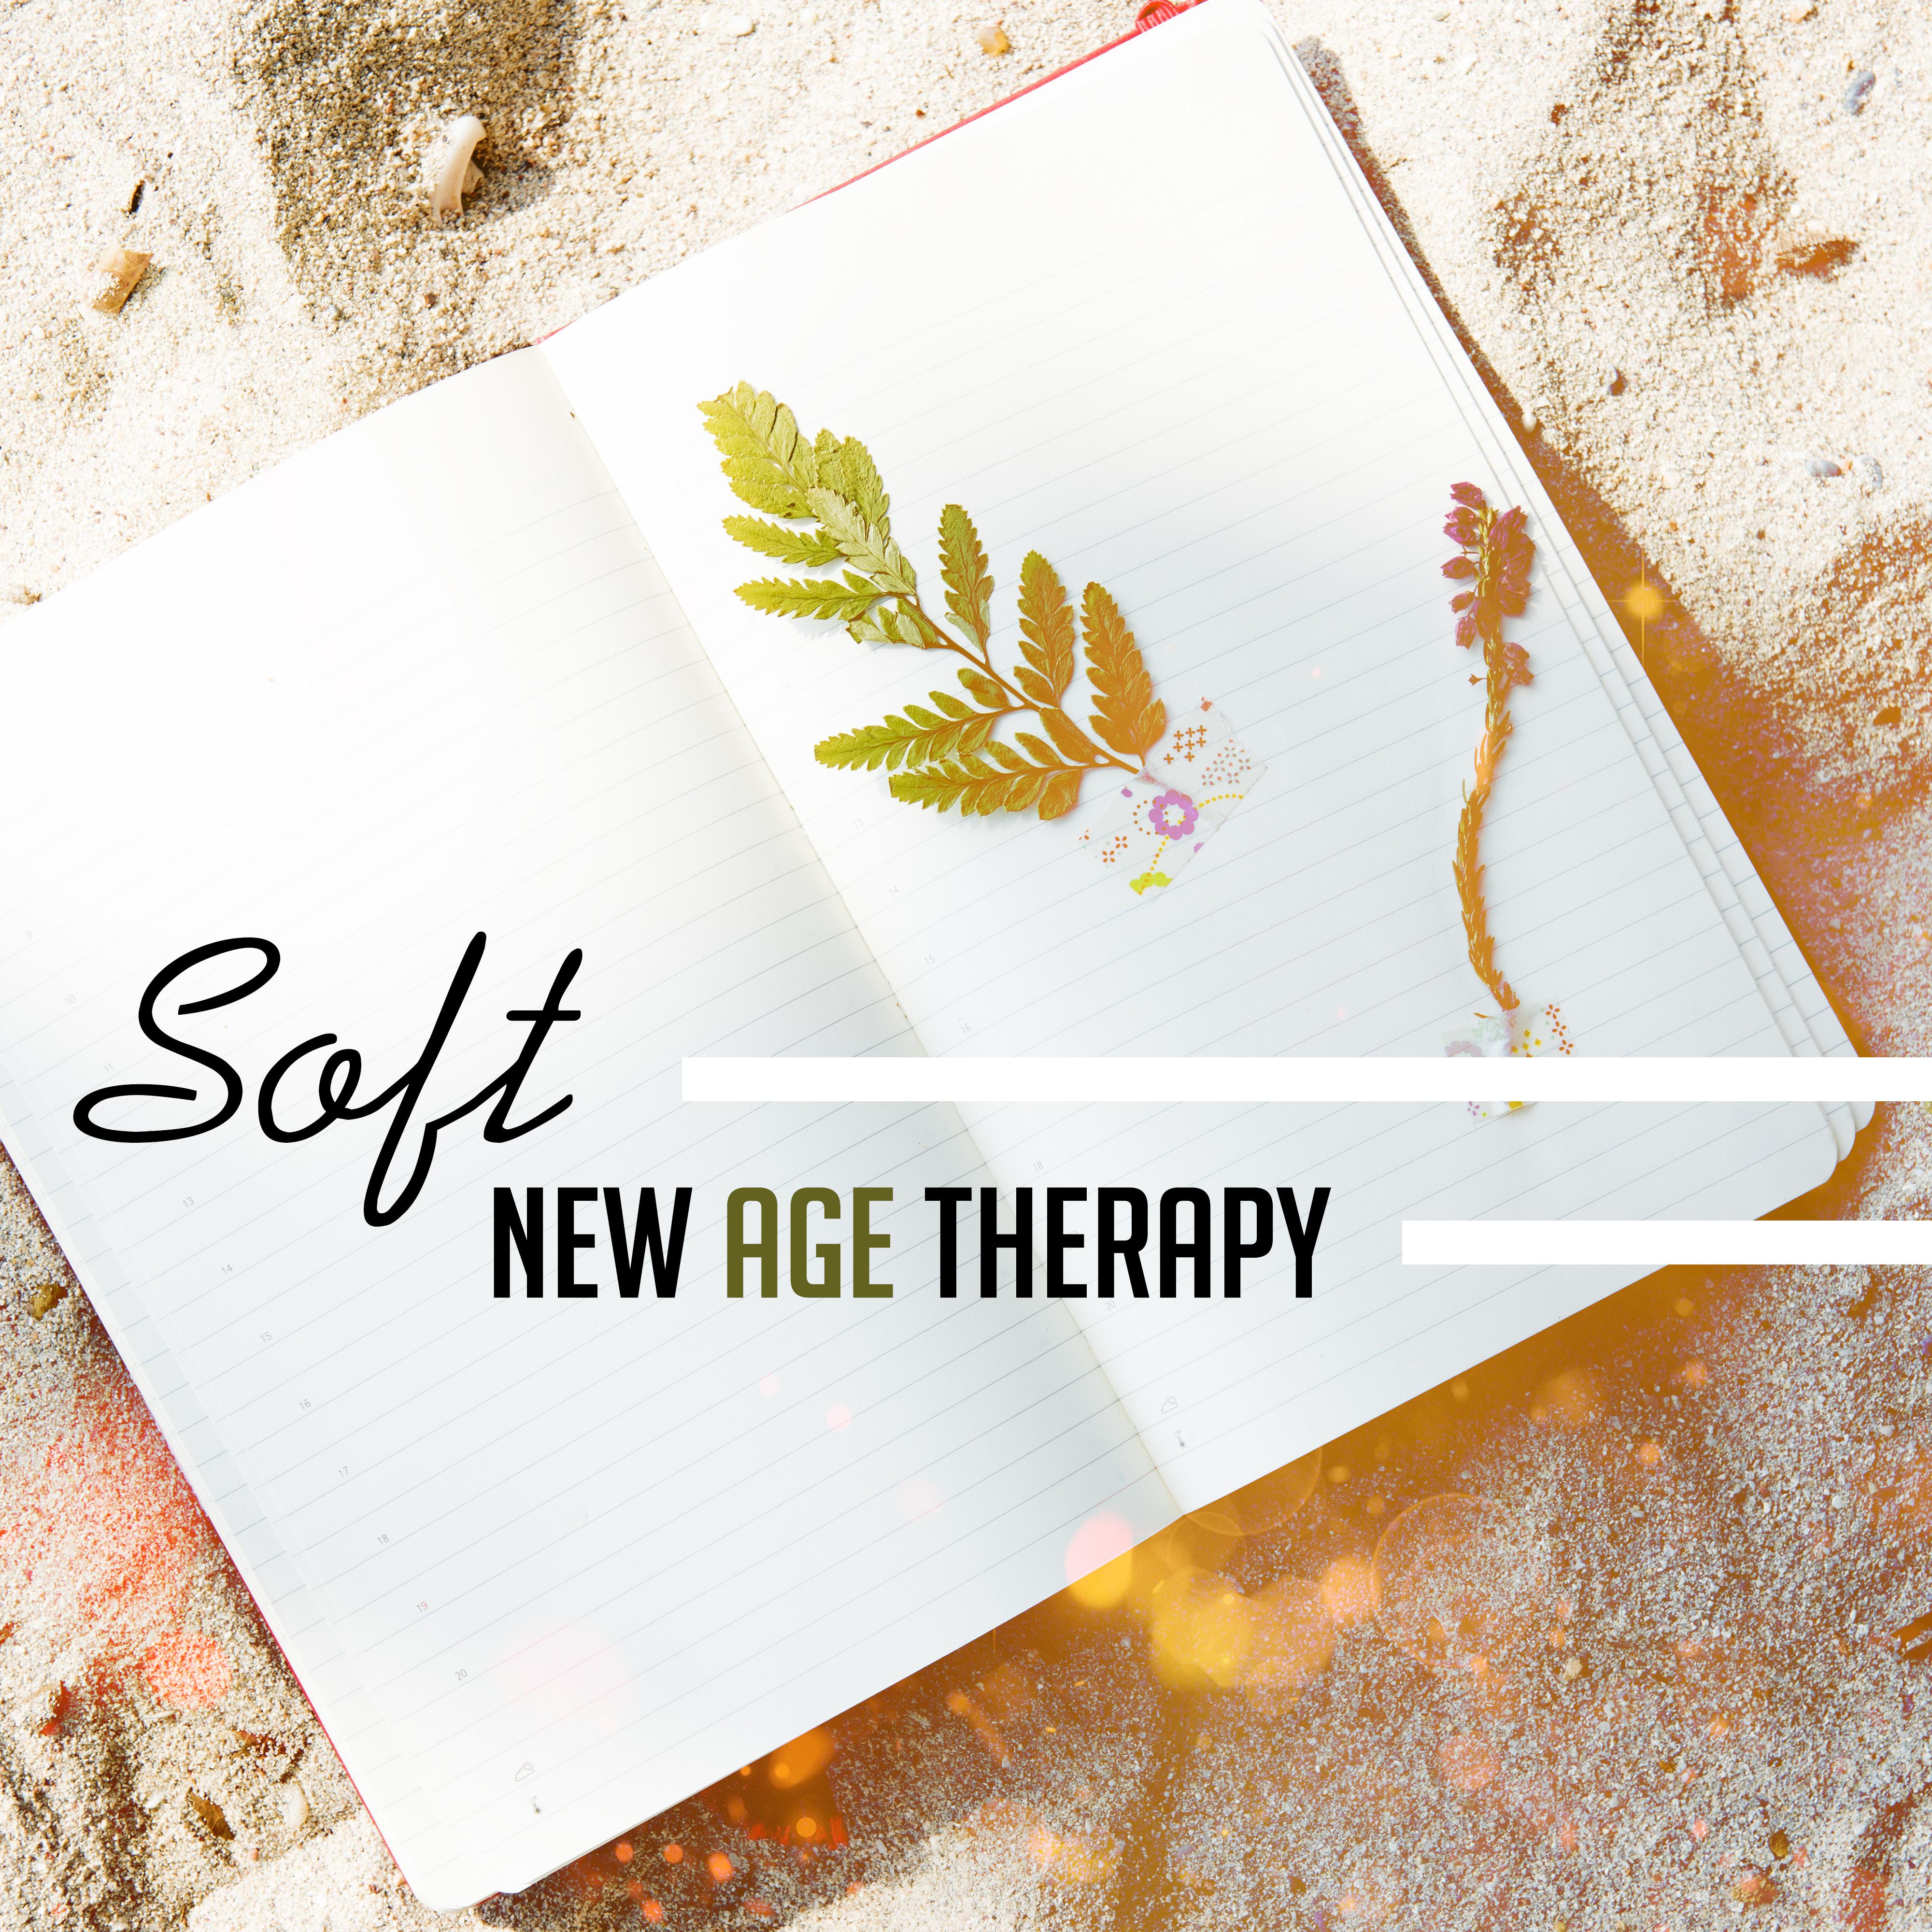 Soft New Age Therapy – Relaxing Waves, Healing Sounds, Peaceful Music, New Age Relaxation, Mind Calmness